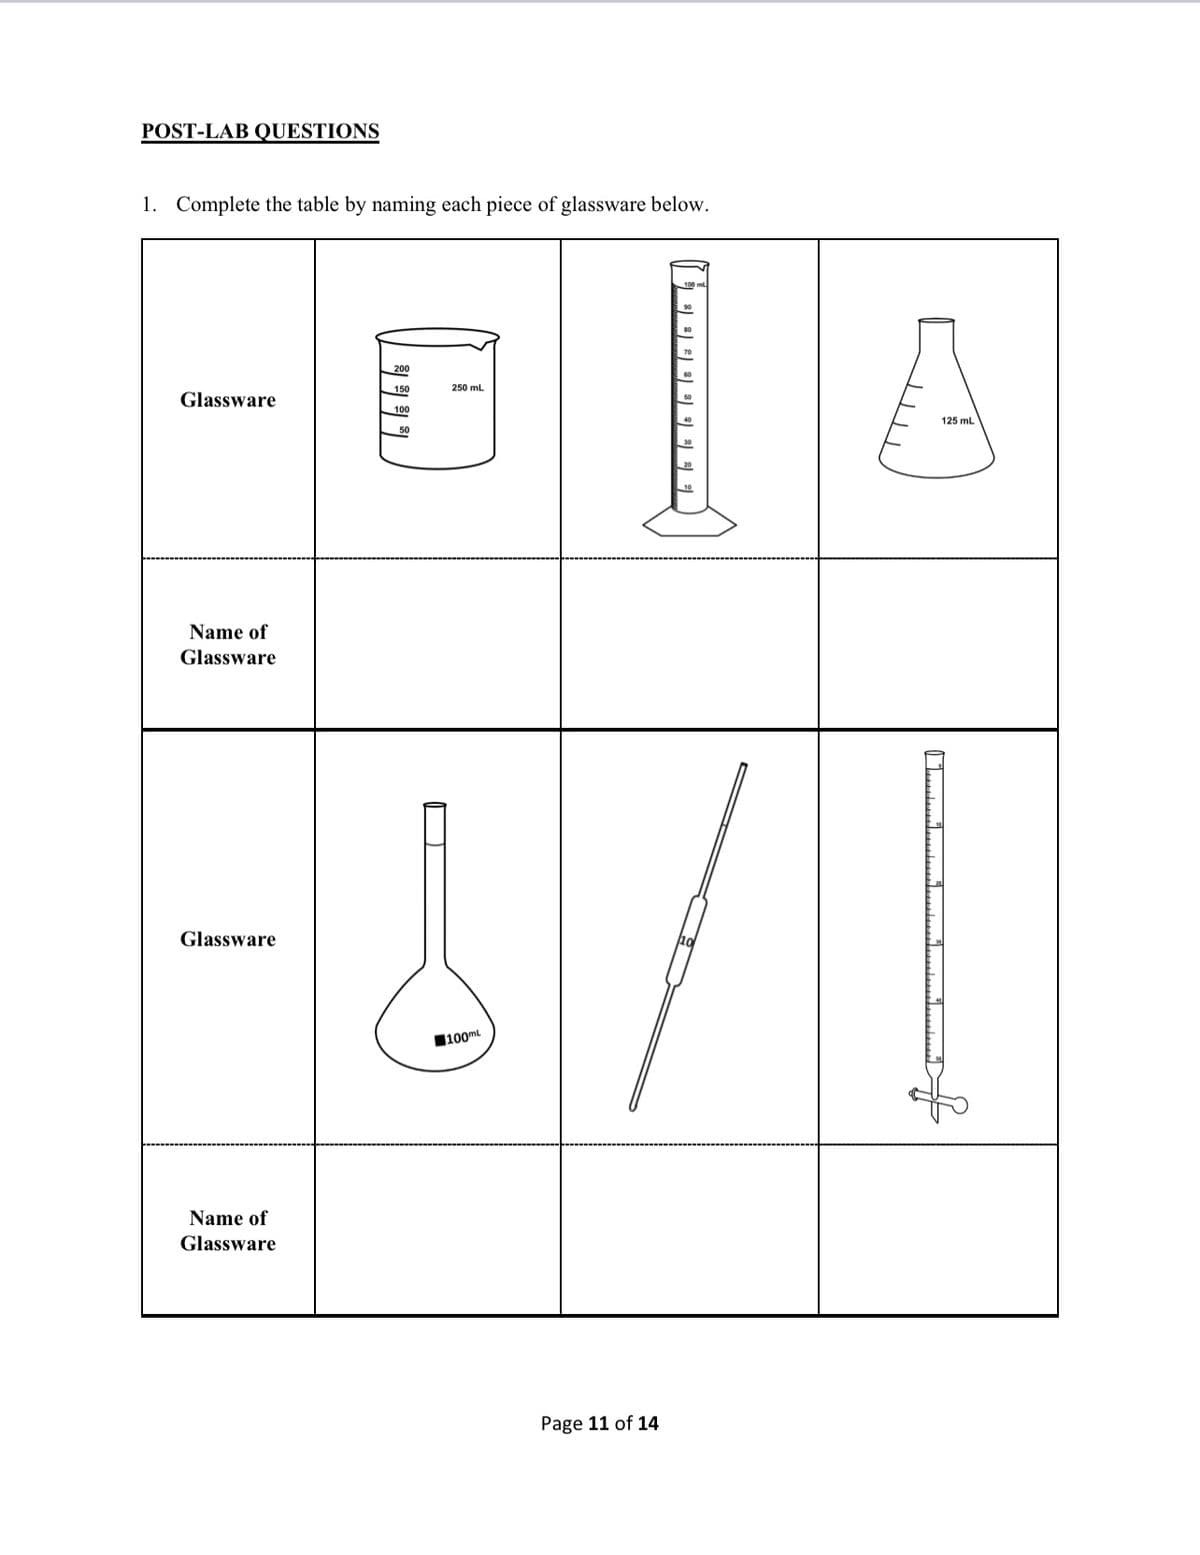 POST-LAB QUESTIONS
1. Complete the table by naming each piece of glassware below.
200
150
250 mL
Glassware
100
125 mL
50
Name of
Glassware
Glassware
100mL
Name of
Glassware
Page 11 of 14
TTTT
